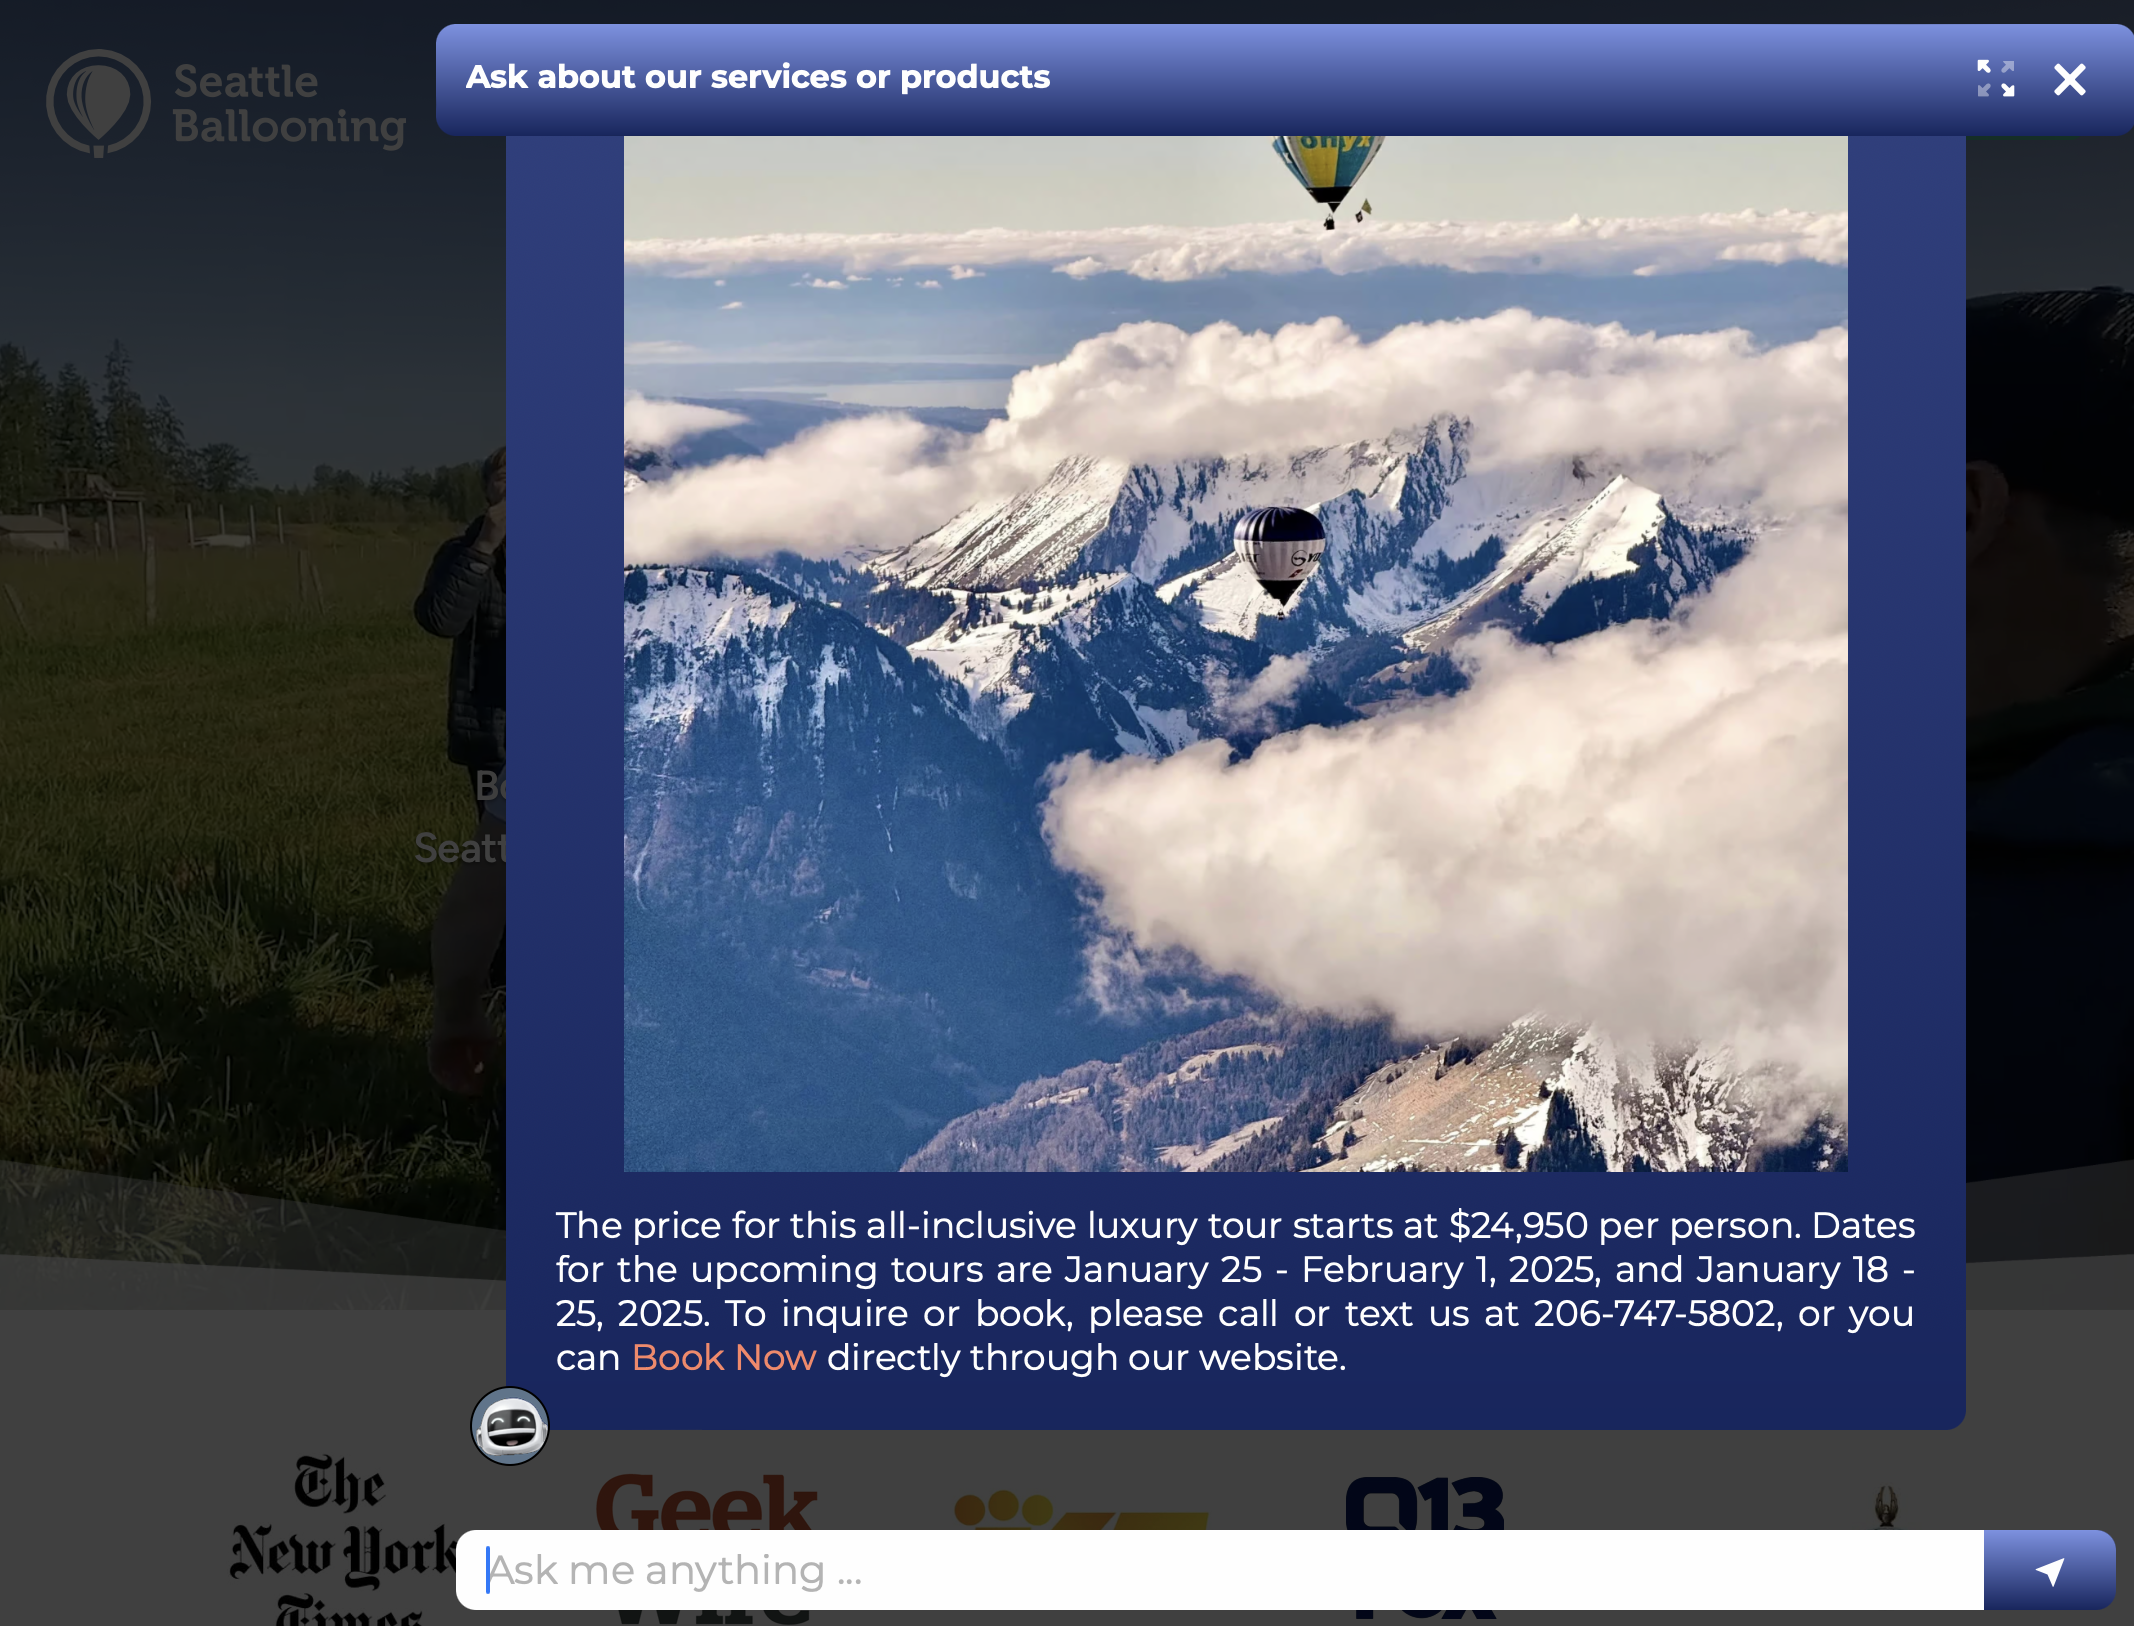 Seattle Ballooning's AI chatbot showing images of their Swiss tour